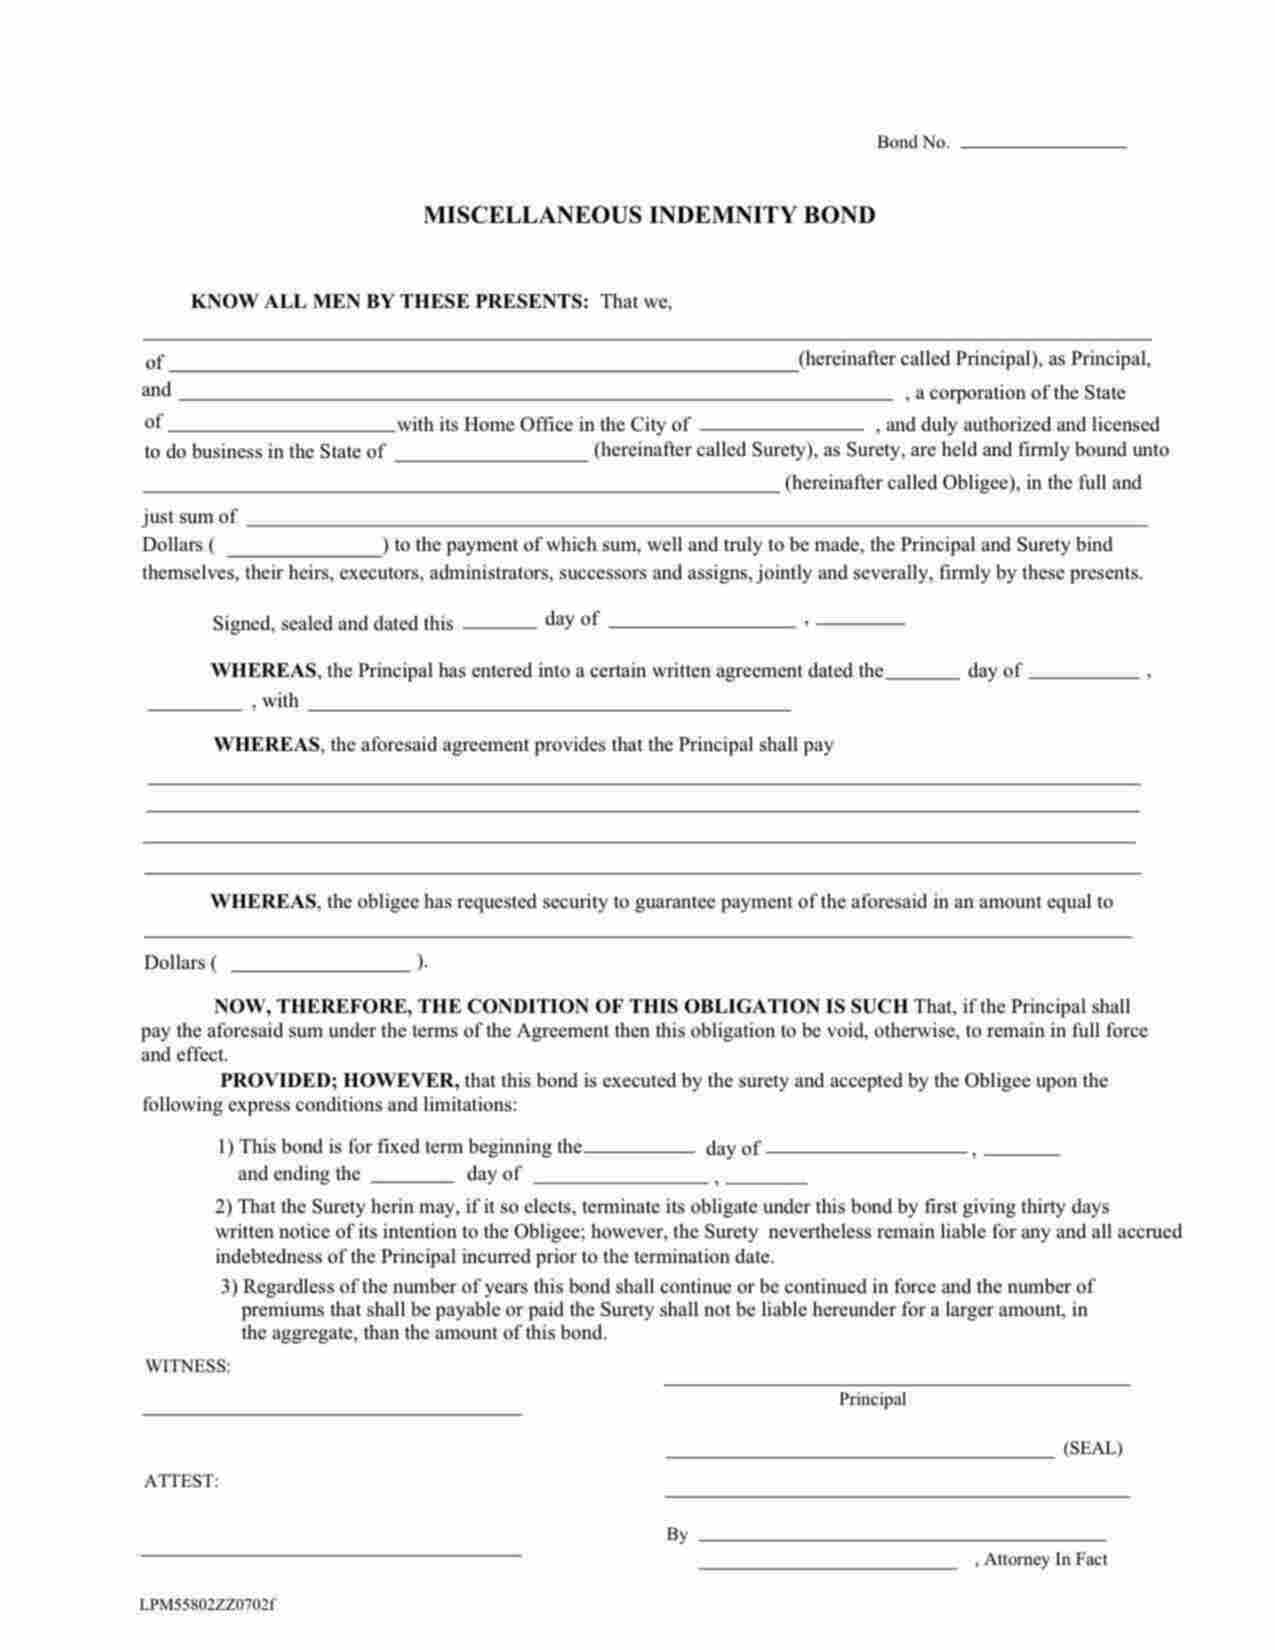 Federal ESI Network Miscellaneous Indemnity Bond Form